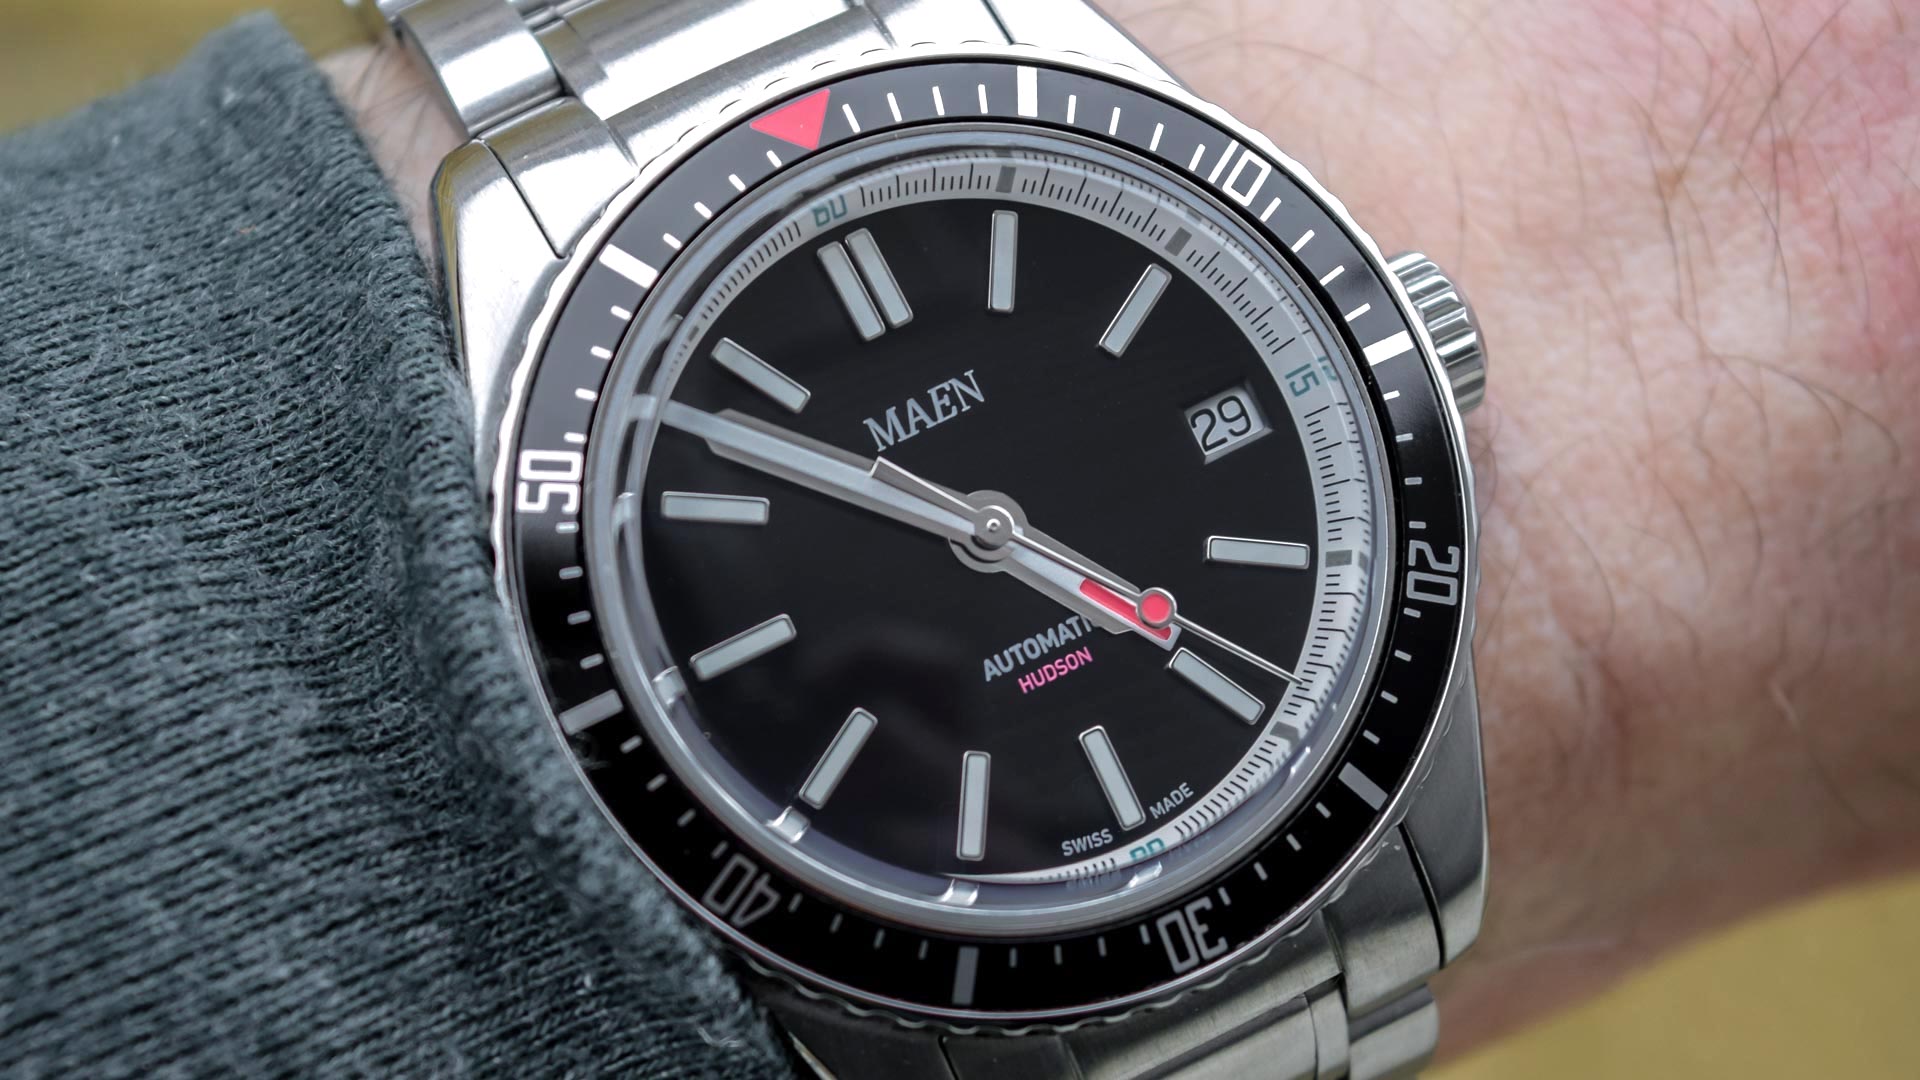 Maen Hudson Automatic 38 Watch Review